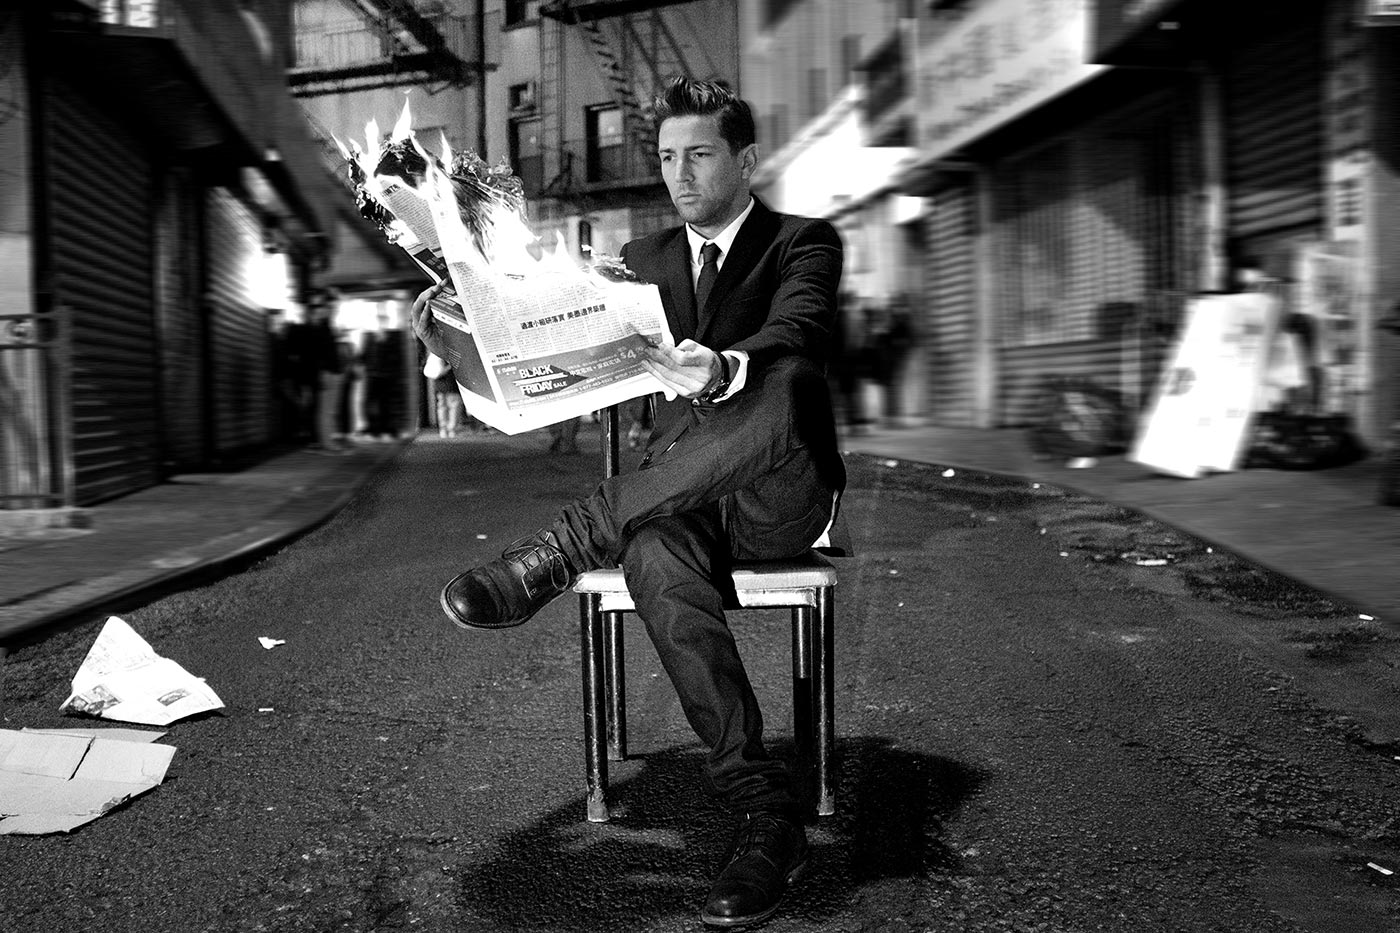 William Grand sitting on a chair in the middle of a city road. He's holding a newspaper that is burning away.